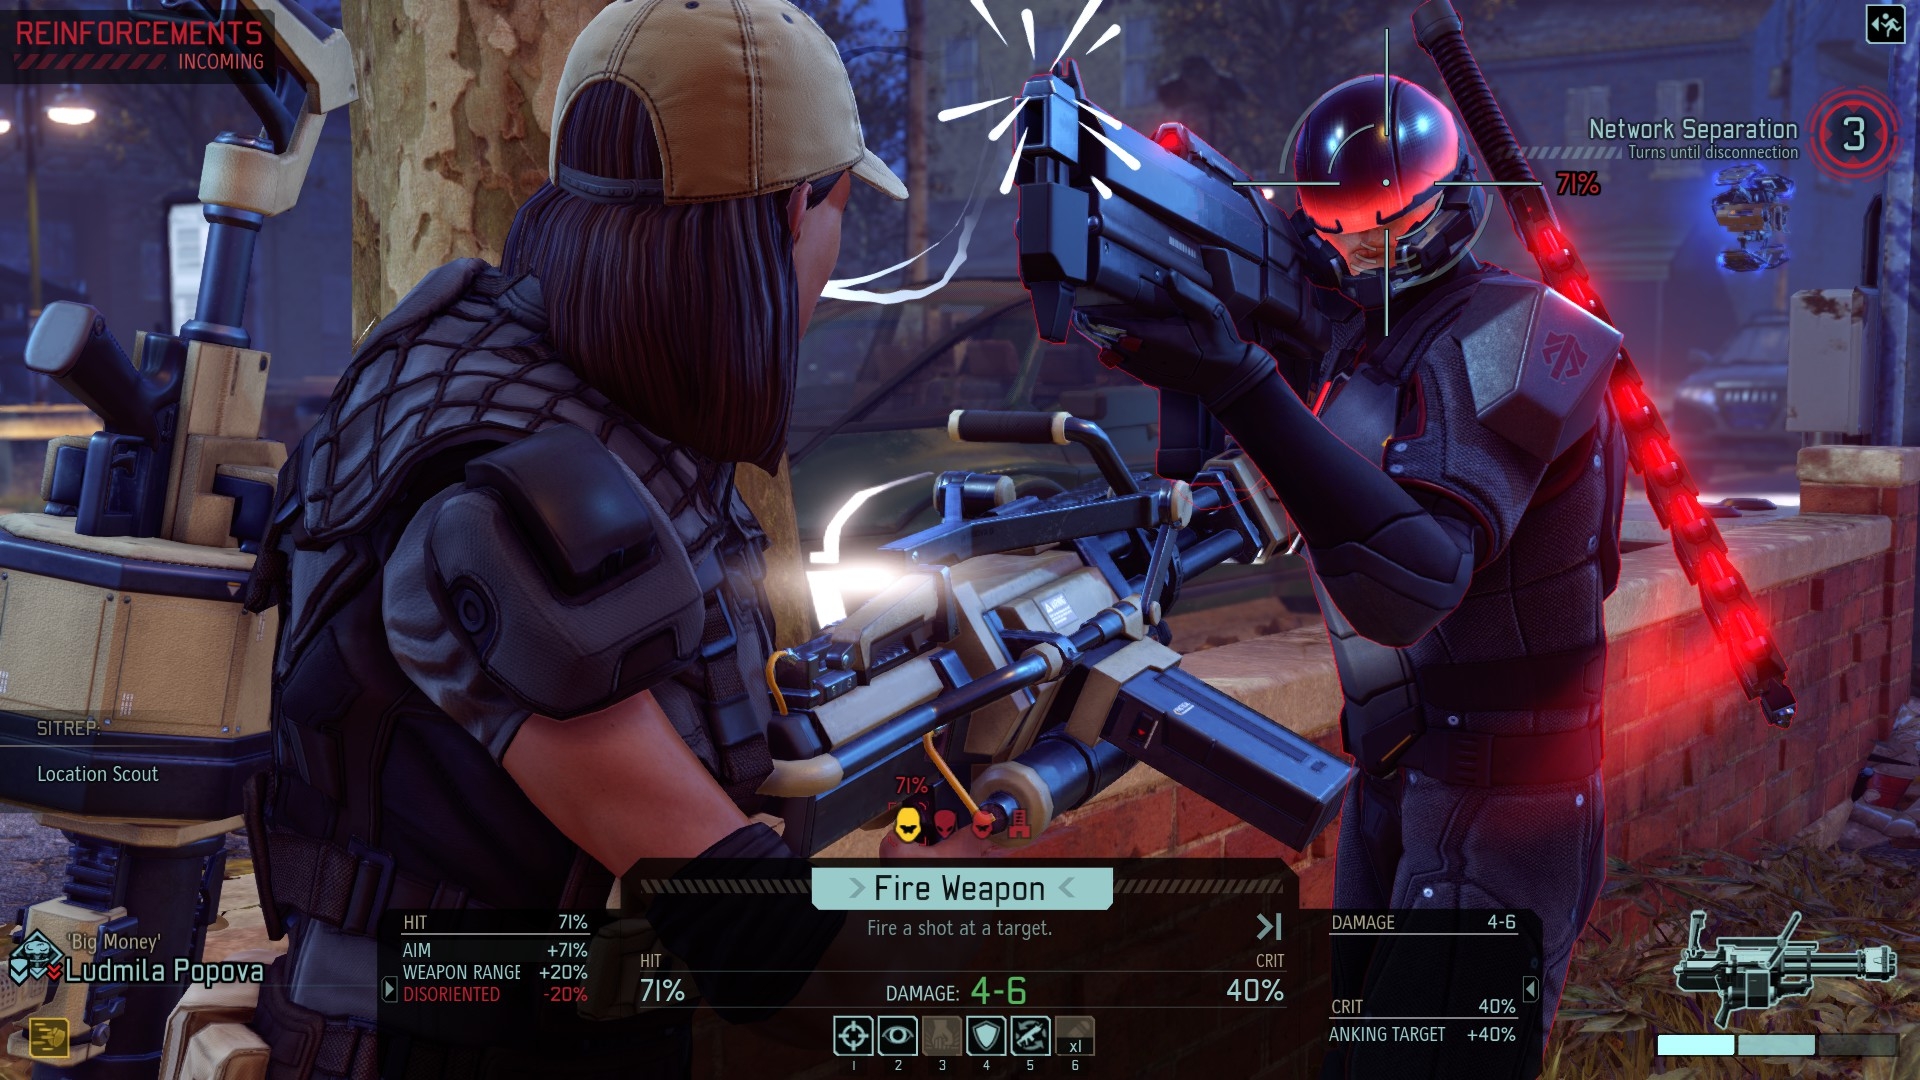 What we want from XCOM 3